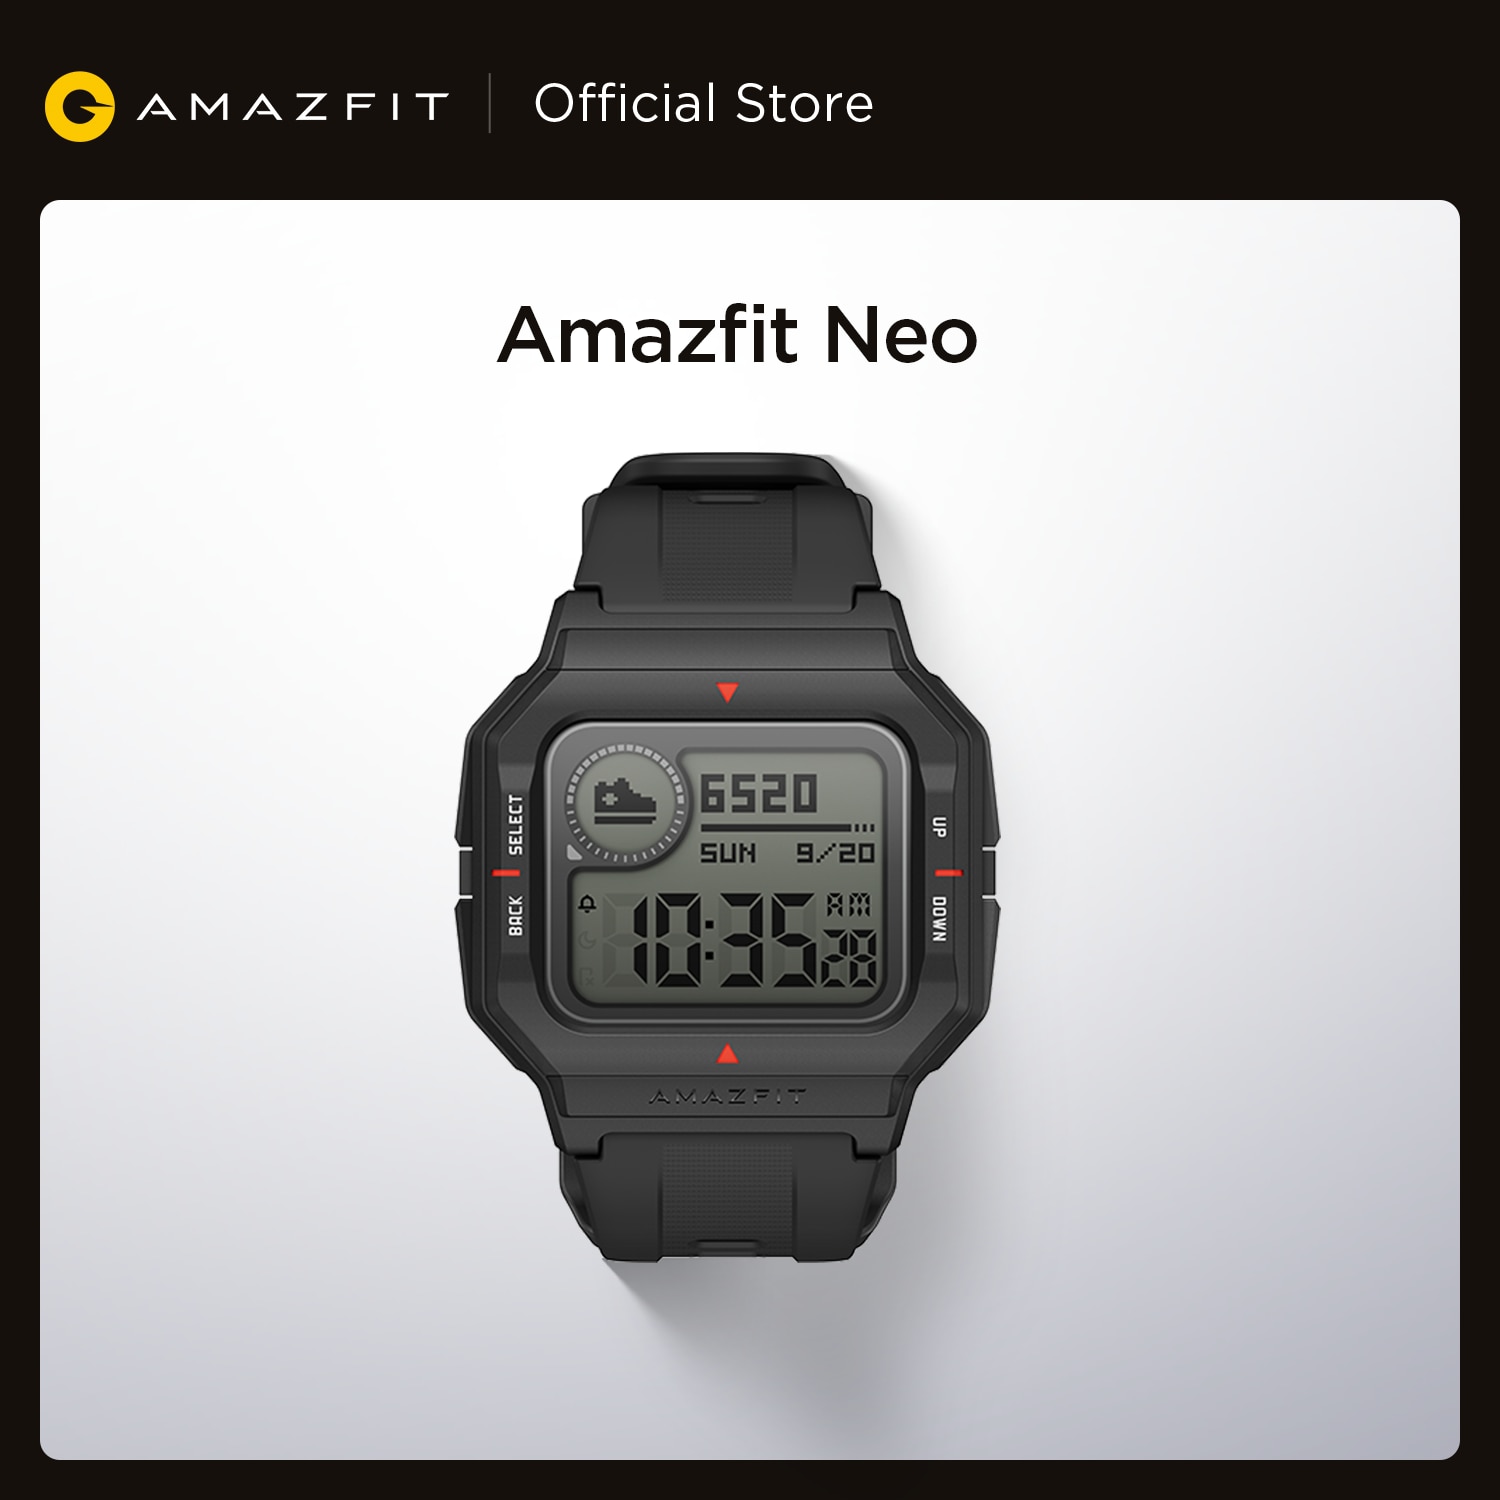 NEW 2020 Amazfit Neo Smart Watch Bluetooth Smartwatch 5ATM Tracking 28Days Battery Life Watch For Android IOS Phone|Smart Watches| - AliExpress